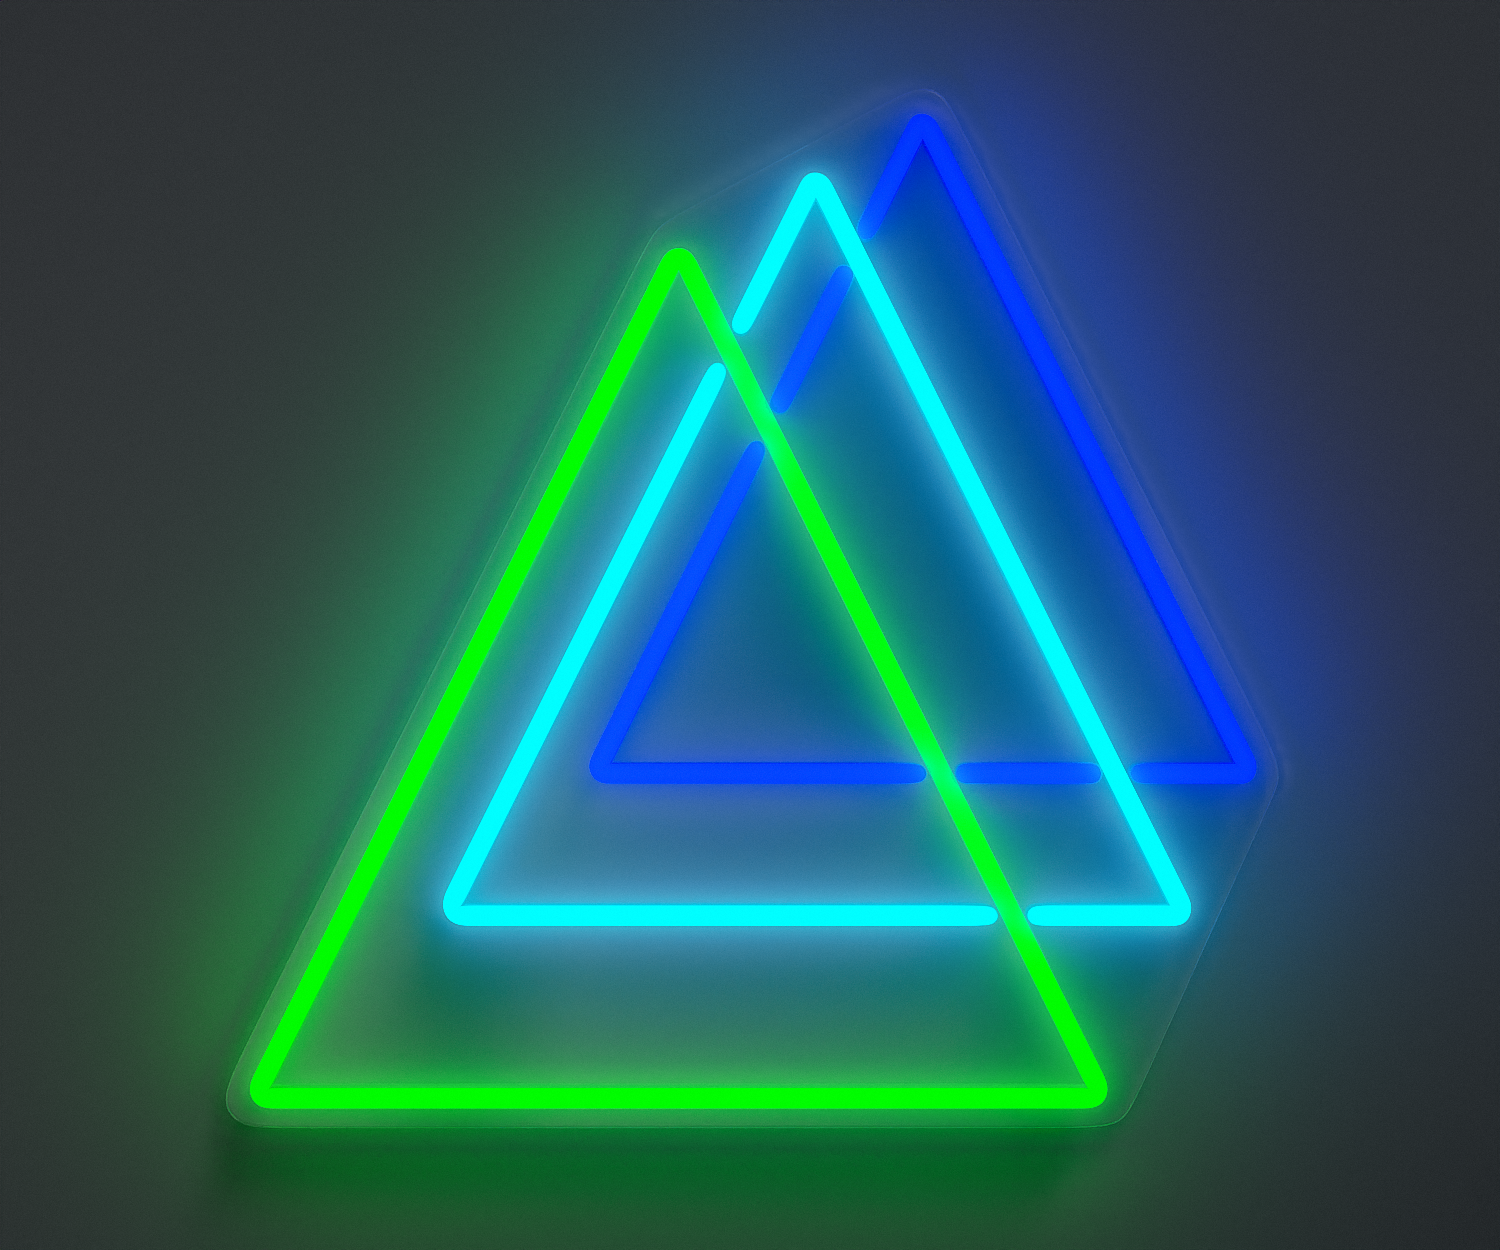 A green, cyan and blue neon sign of three triangles